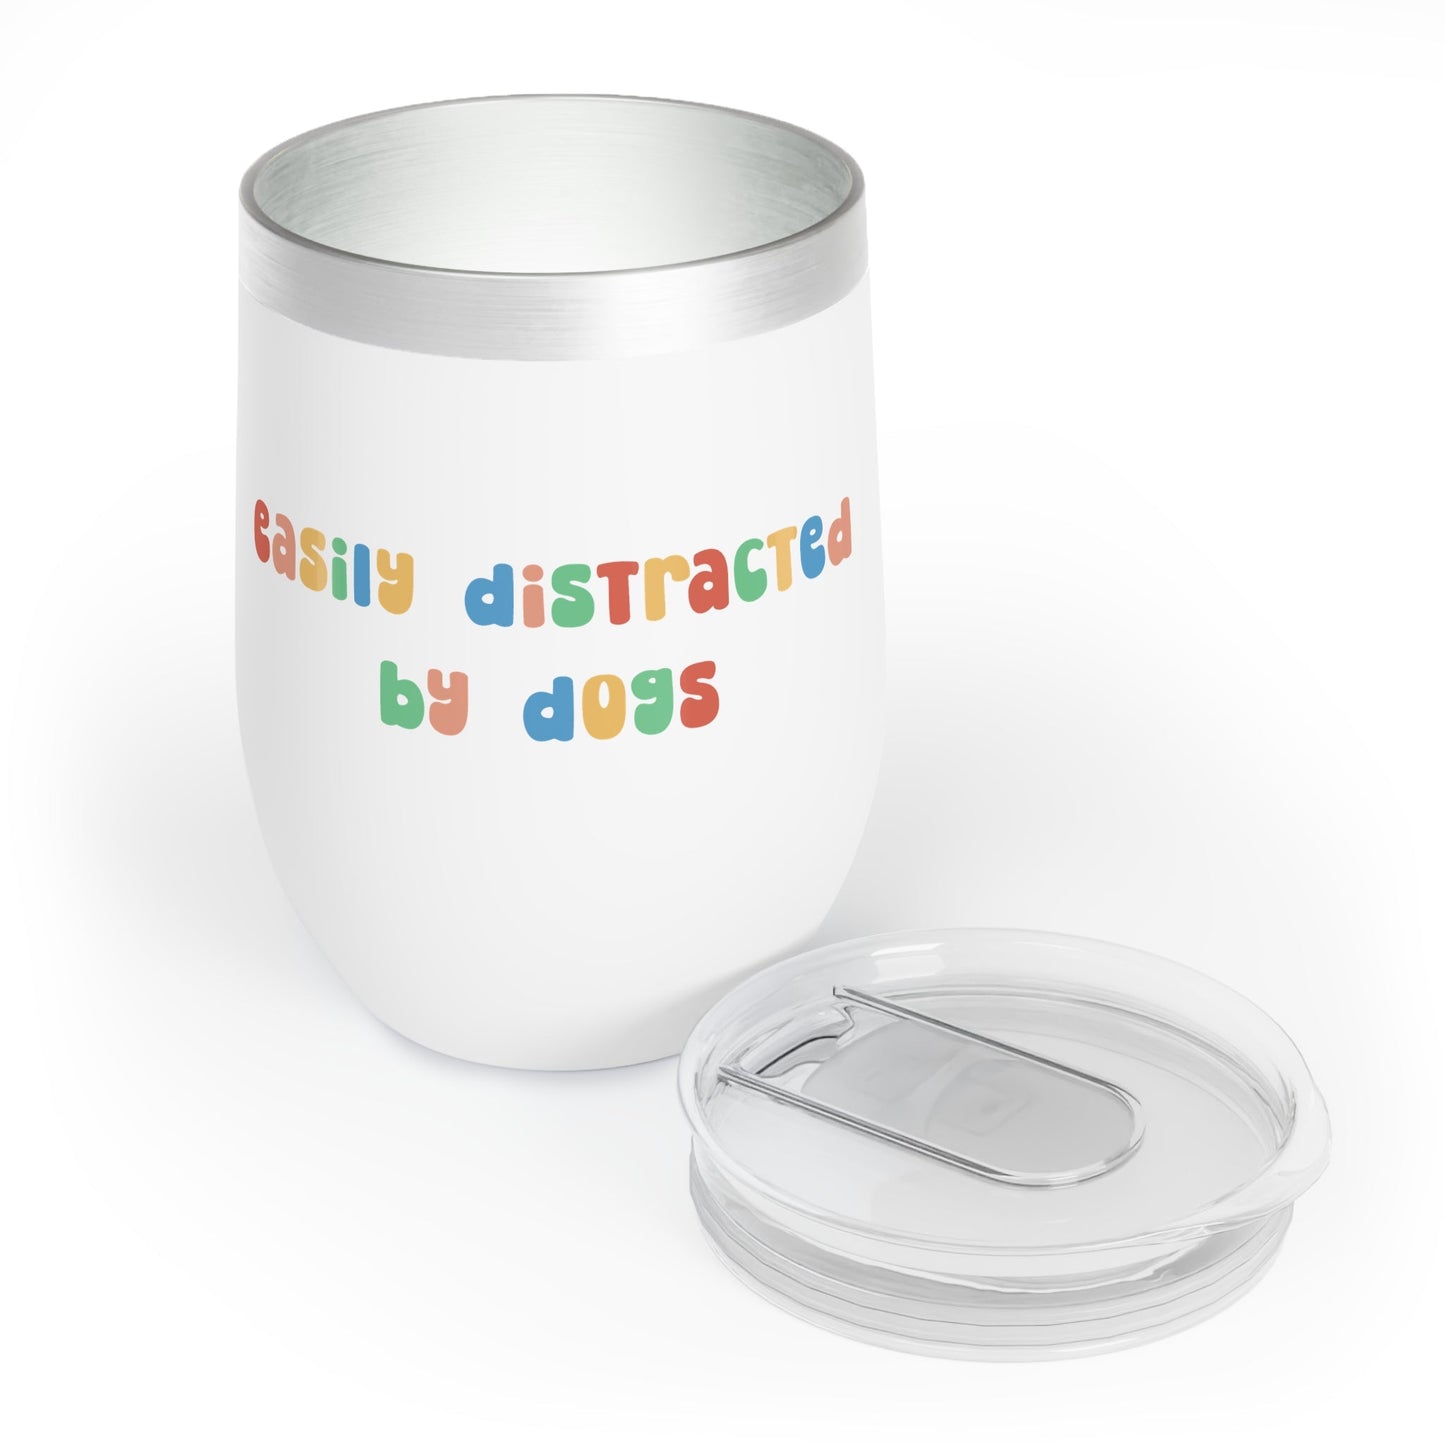 Easily Distracted by Dogs | Wine Tumbler - Detezi Designs-32203523071287591493